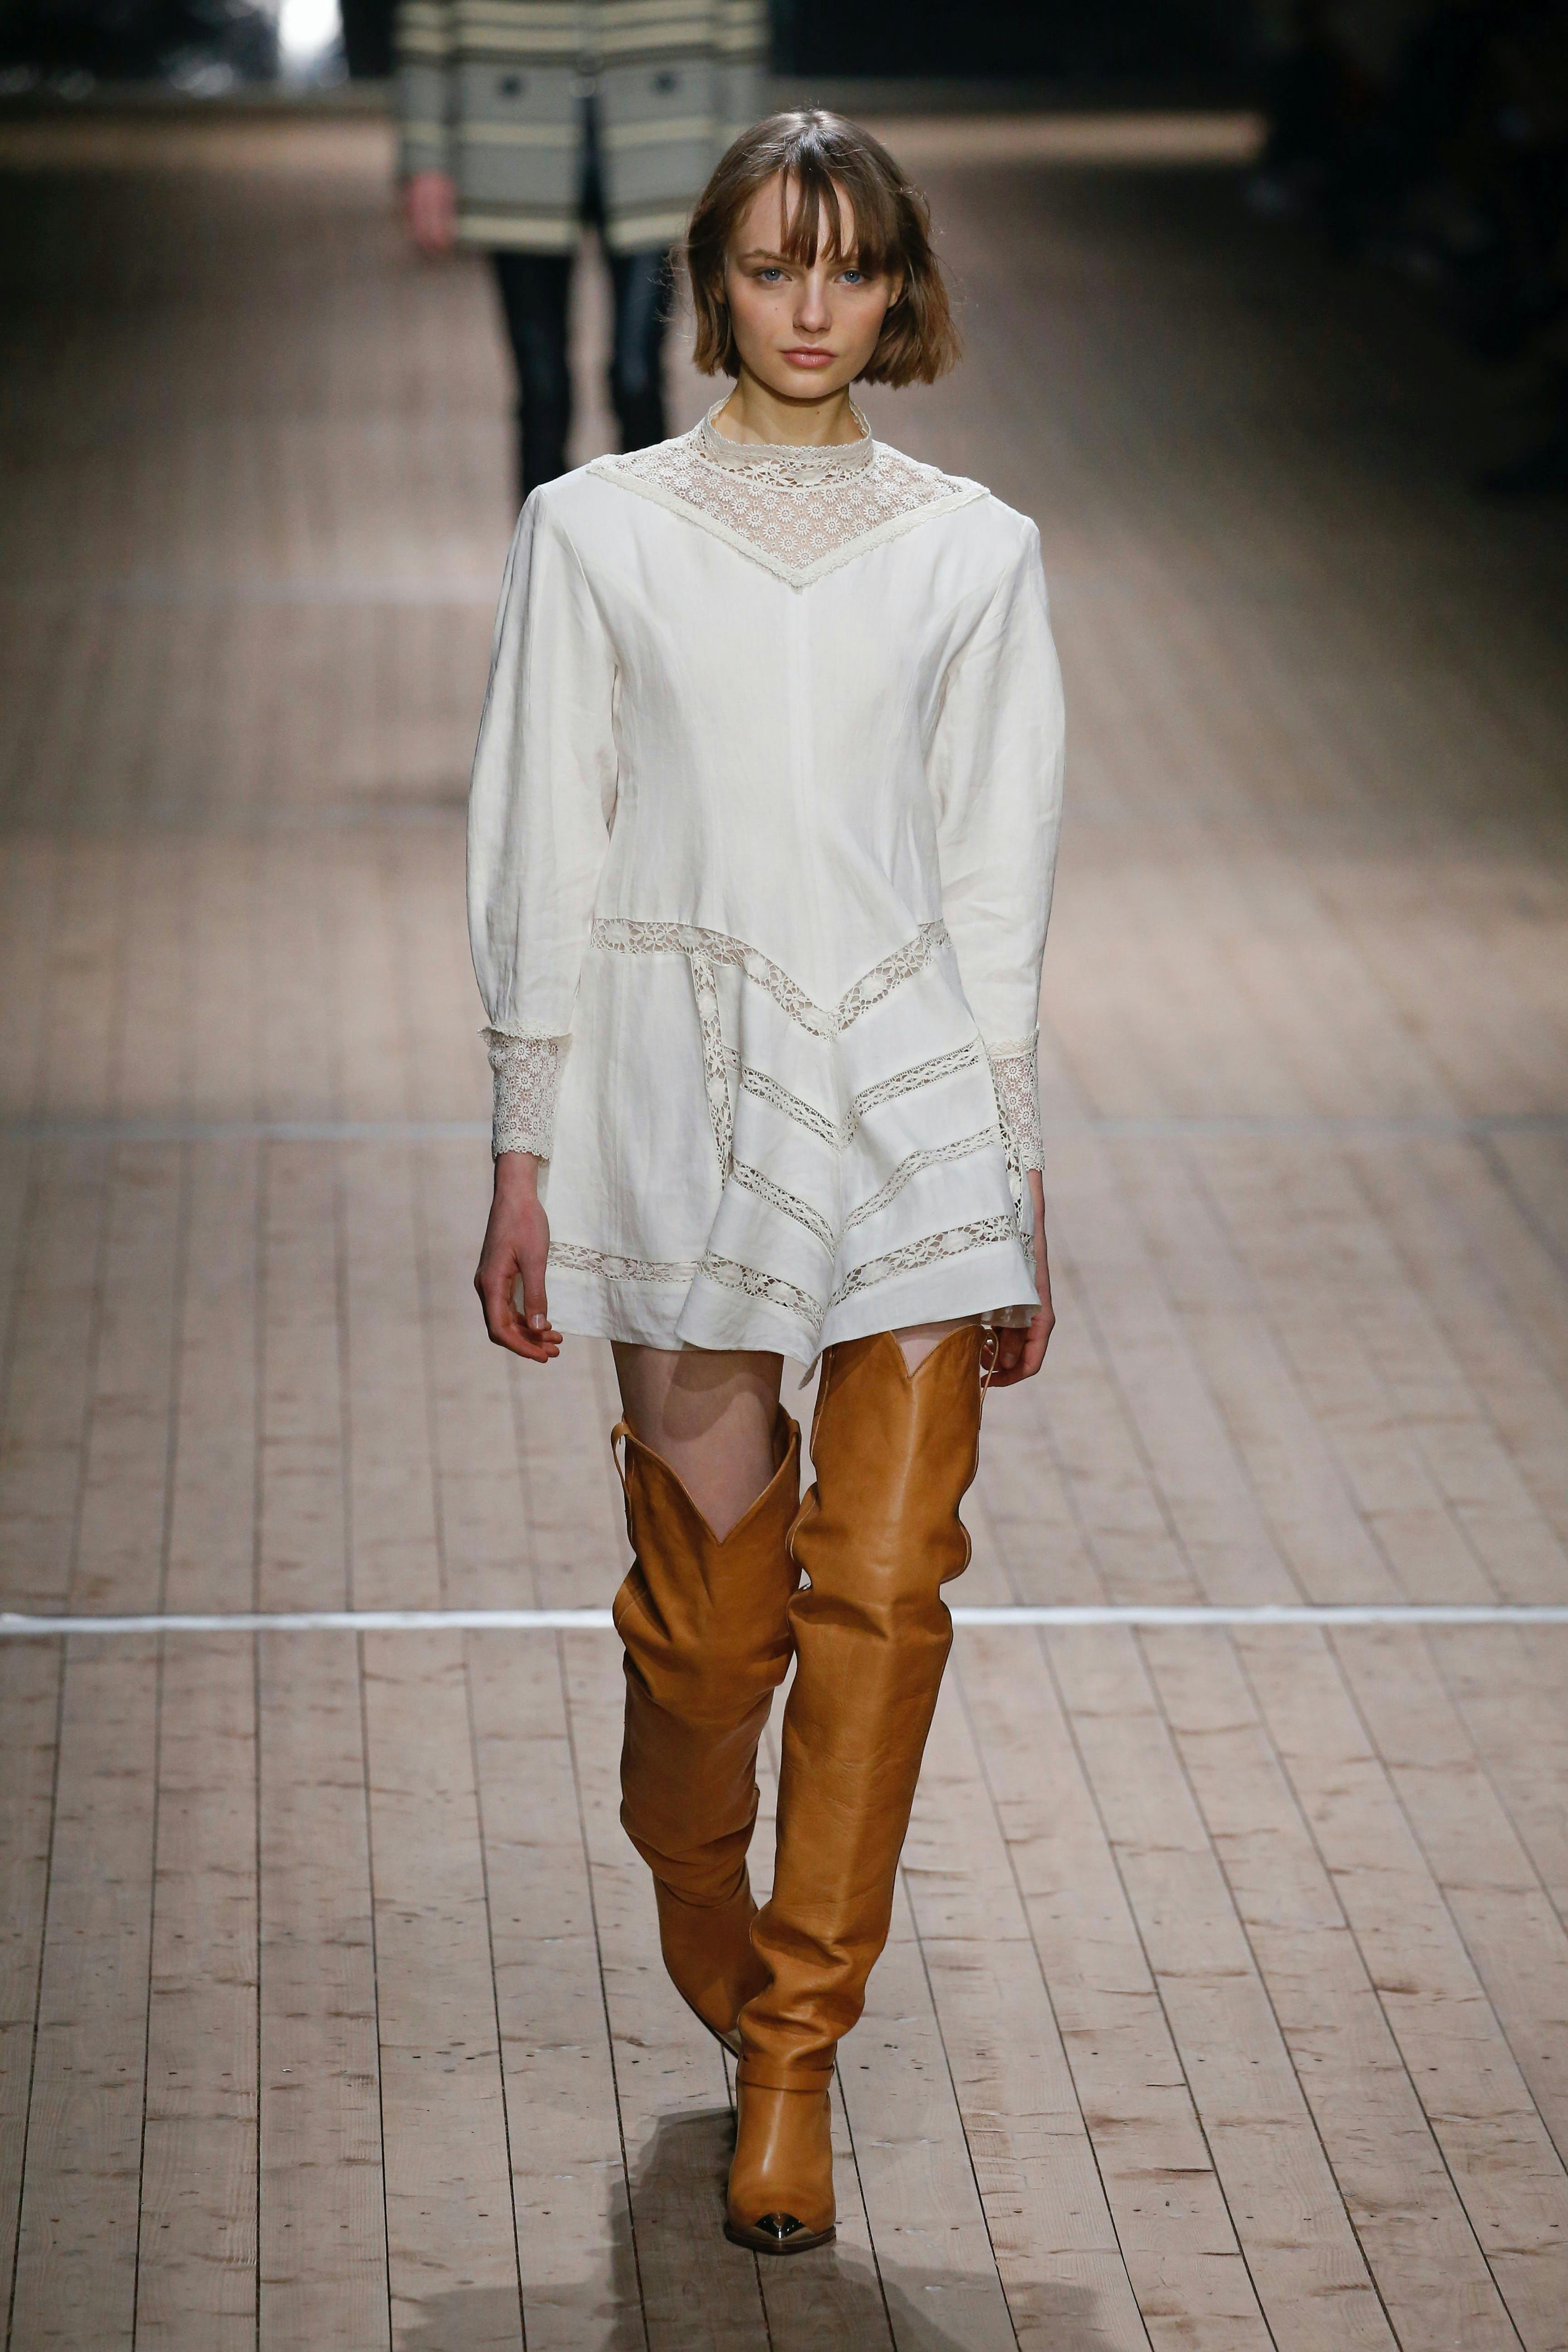 isabel marant ready to wear fall winter 2018 -19 paris february march 2018 clothing apparel person human sleeve footwear blouse boot